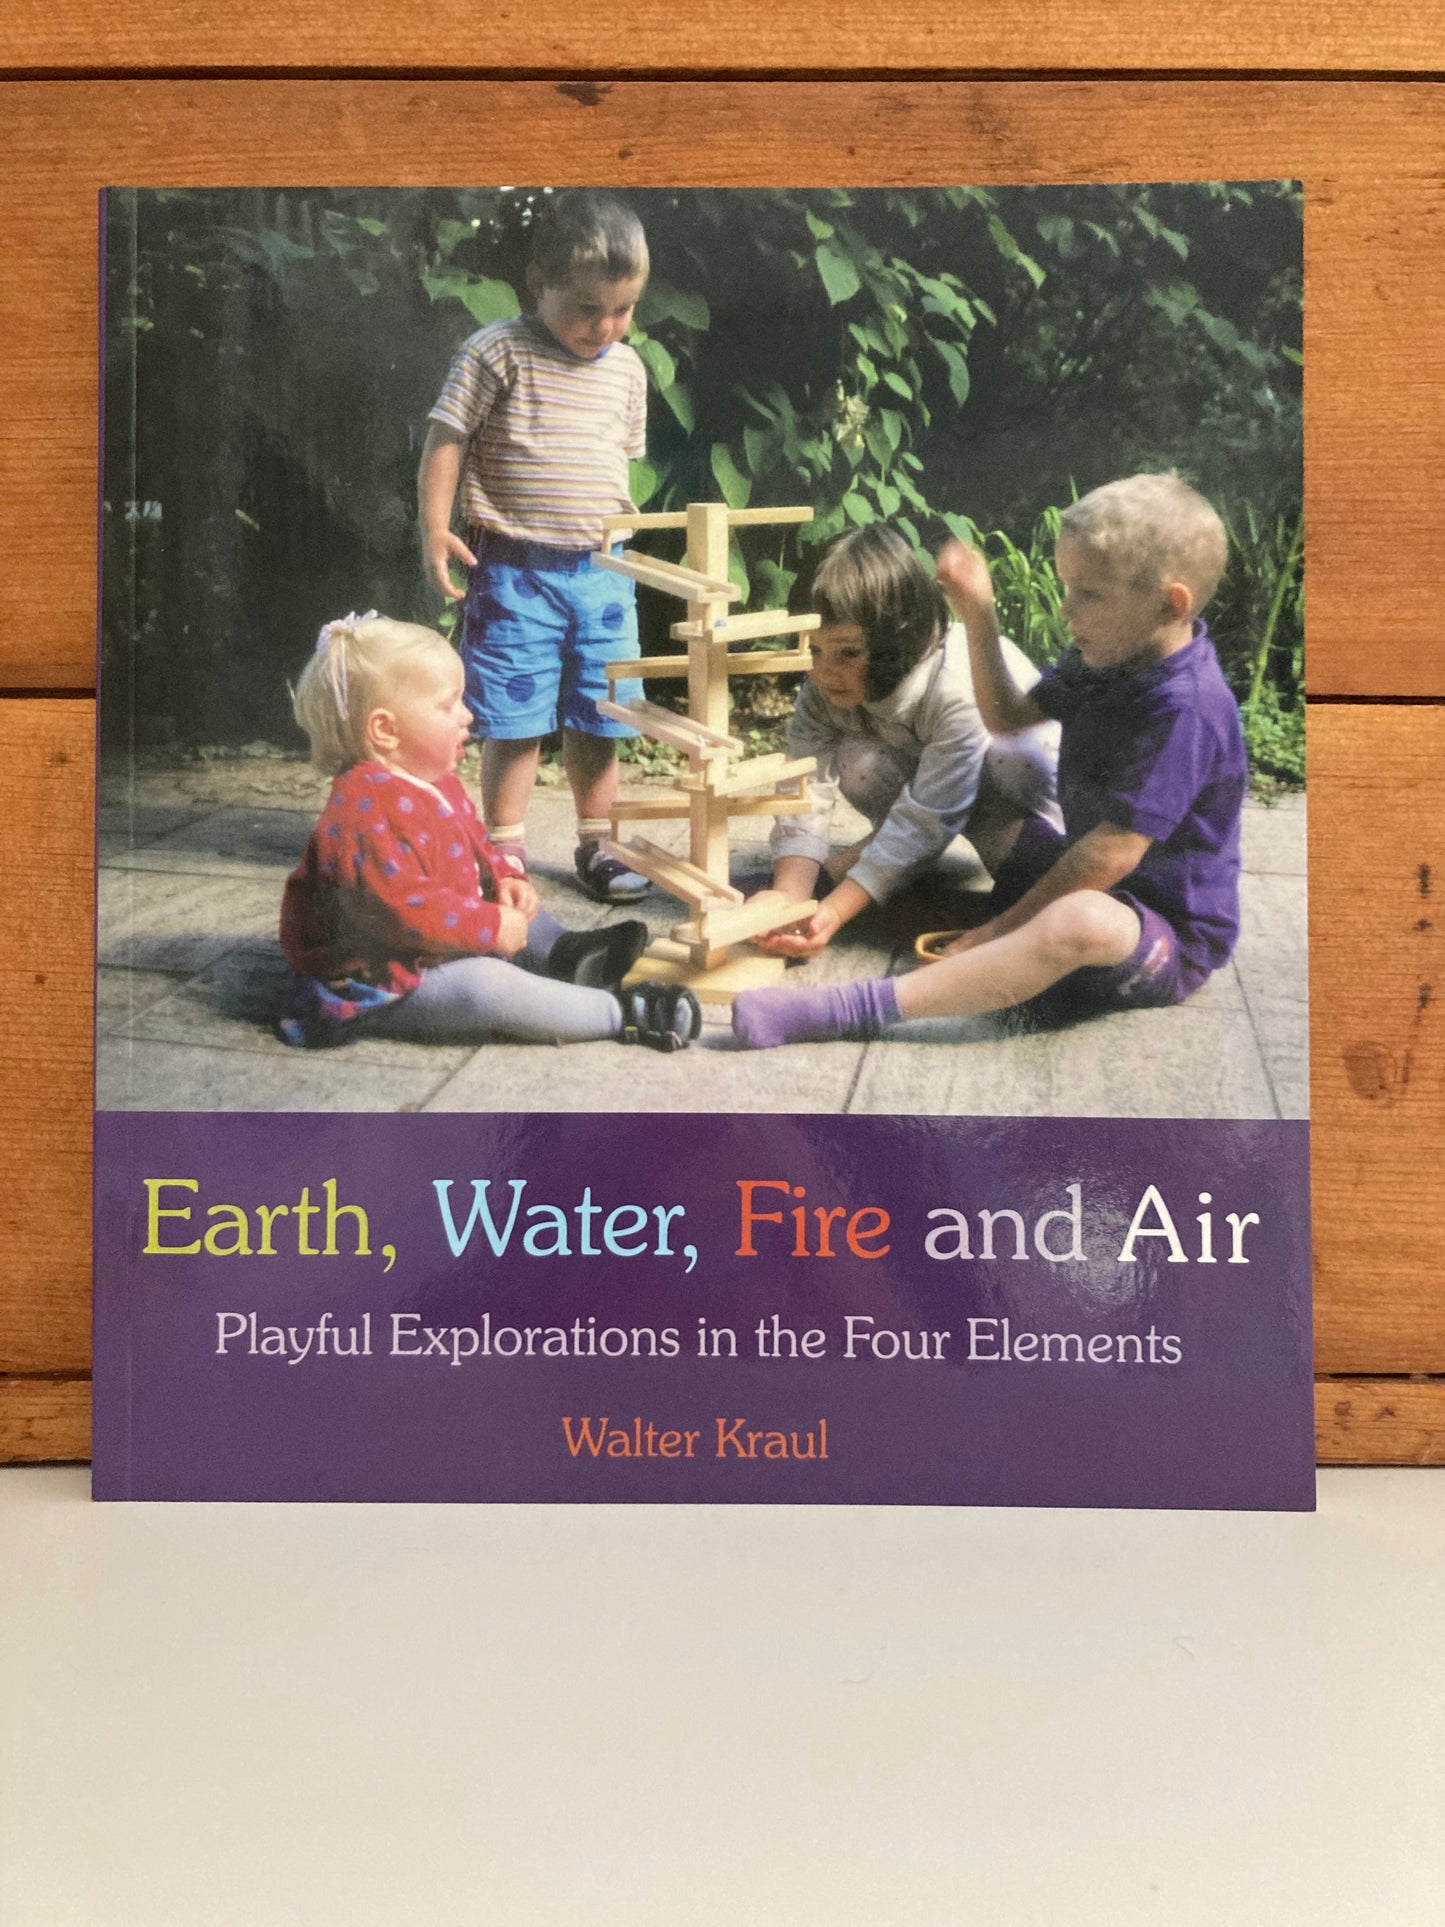 Crafting Resource Book - EARTH, WATER, FIRE and AIR